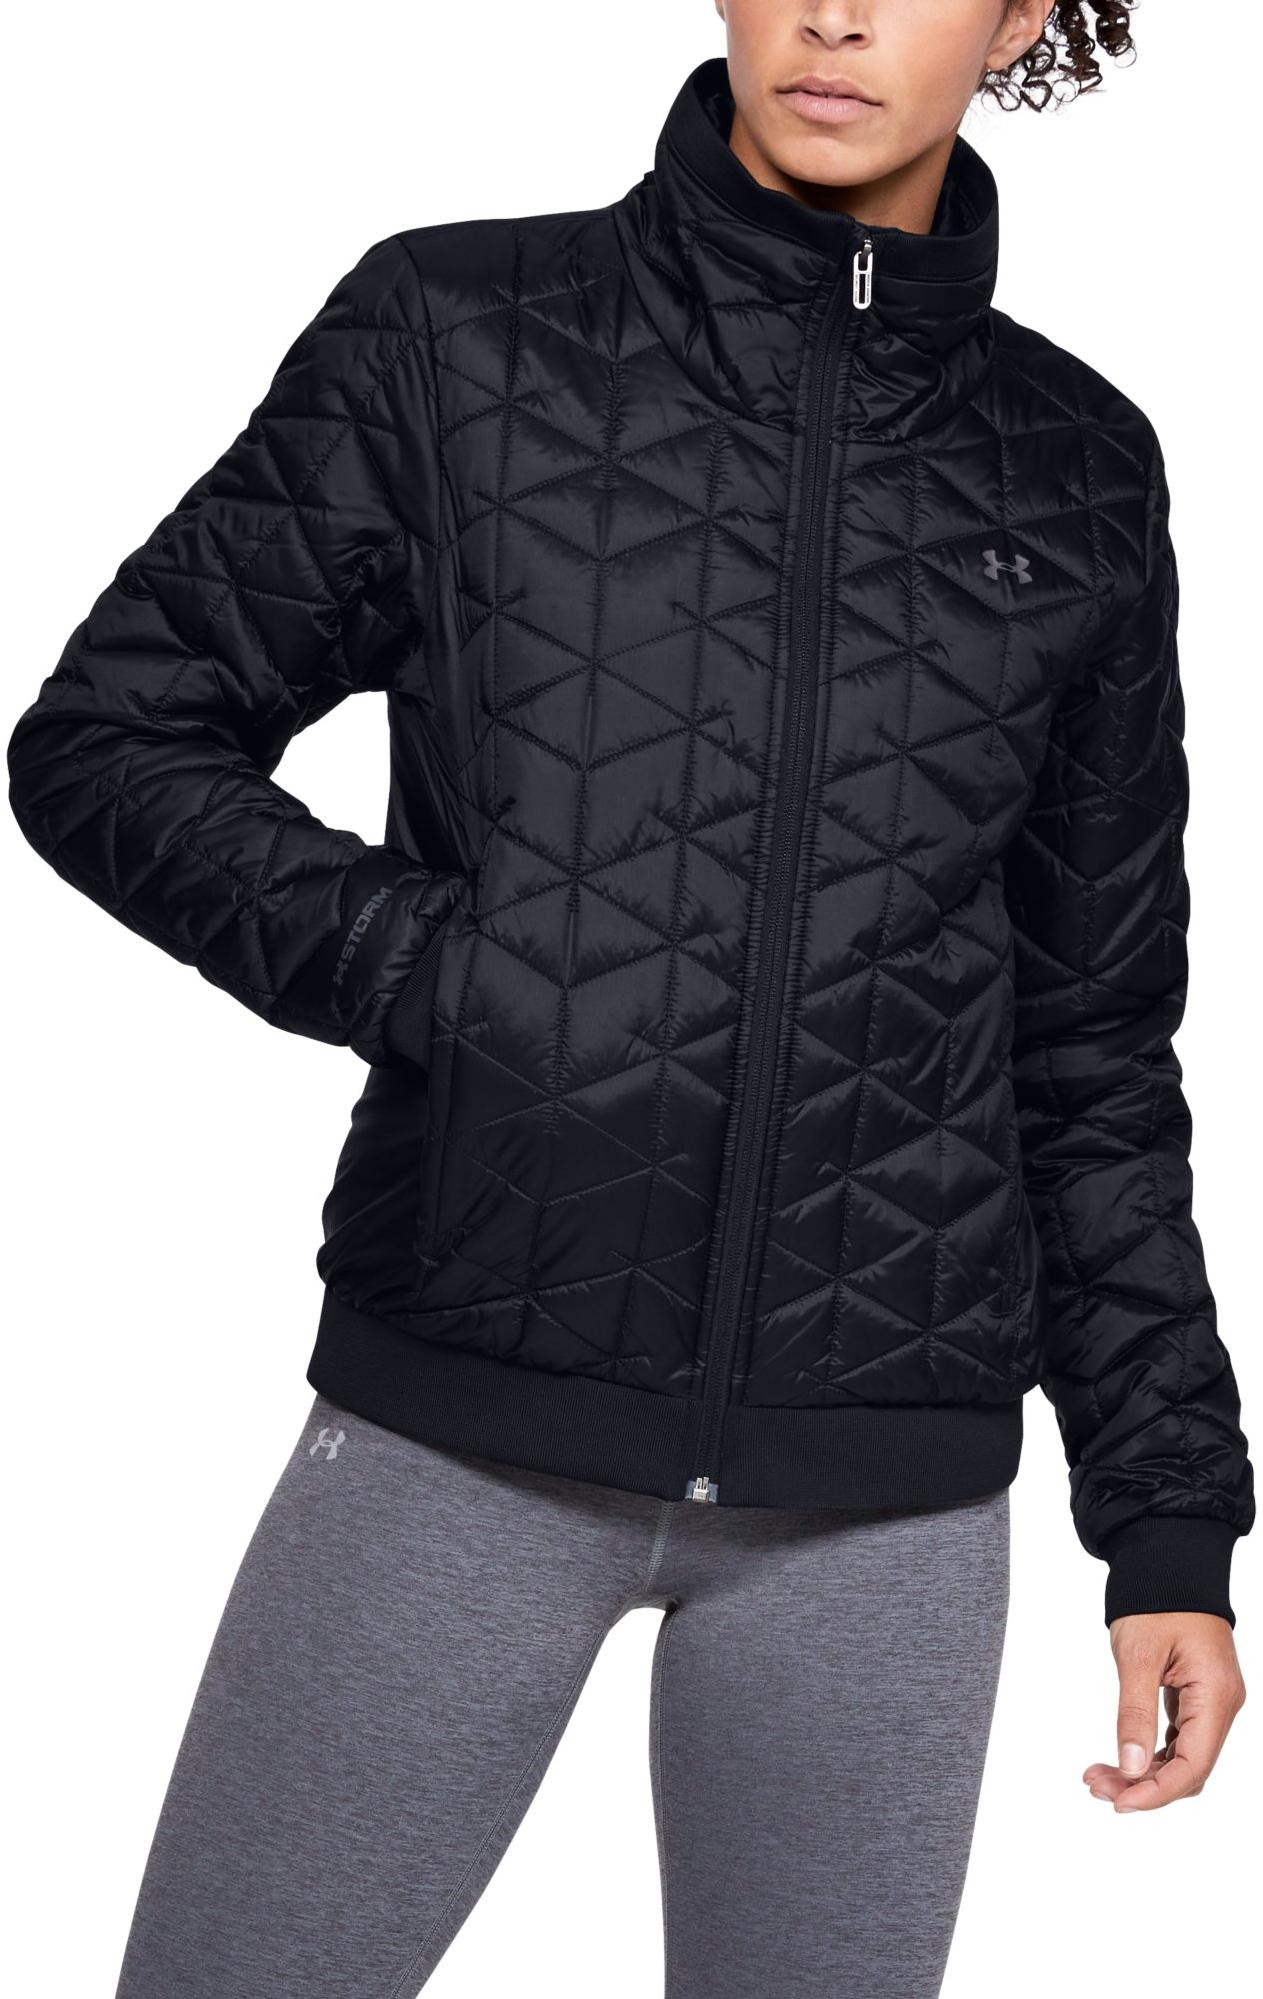 Anoraque Under Armour CG Reactor Performance Jacket